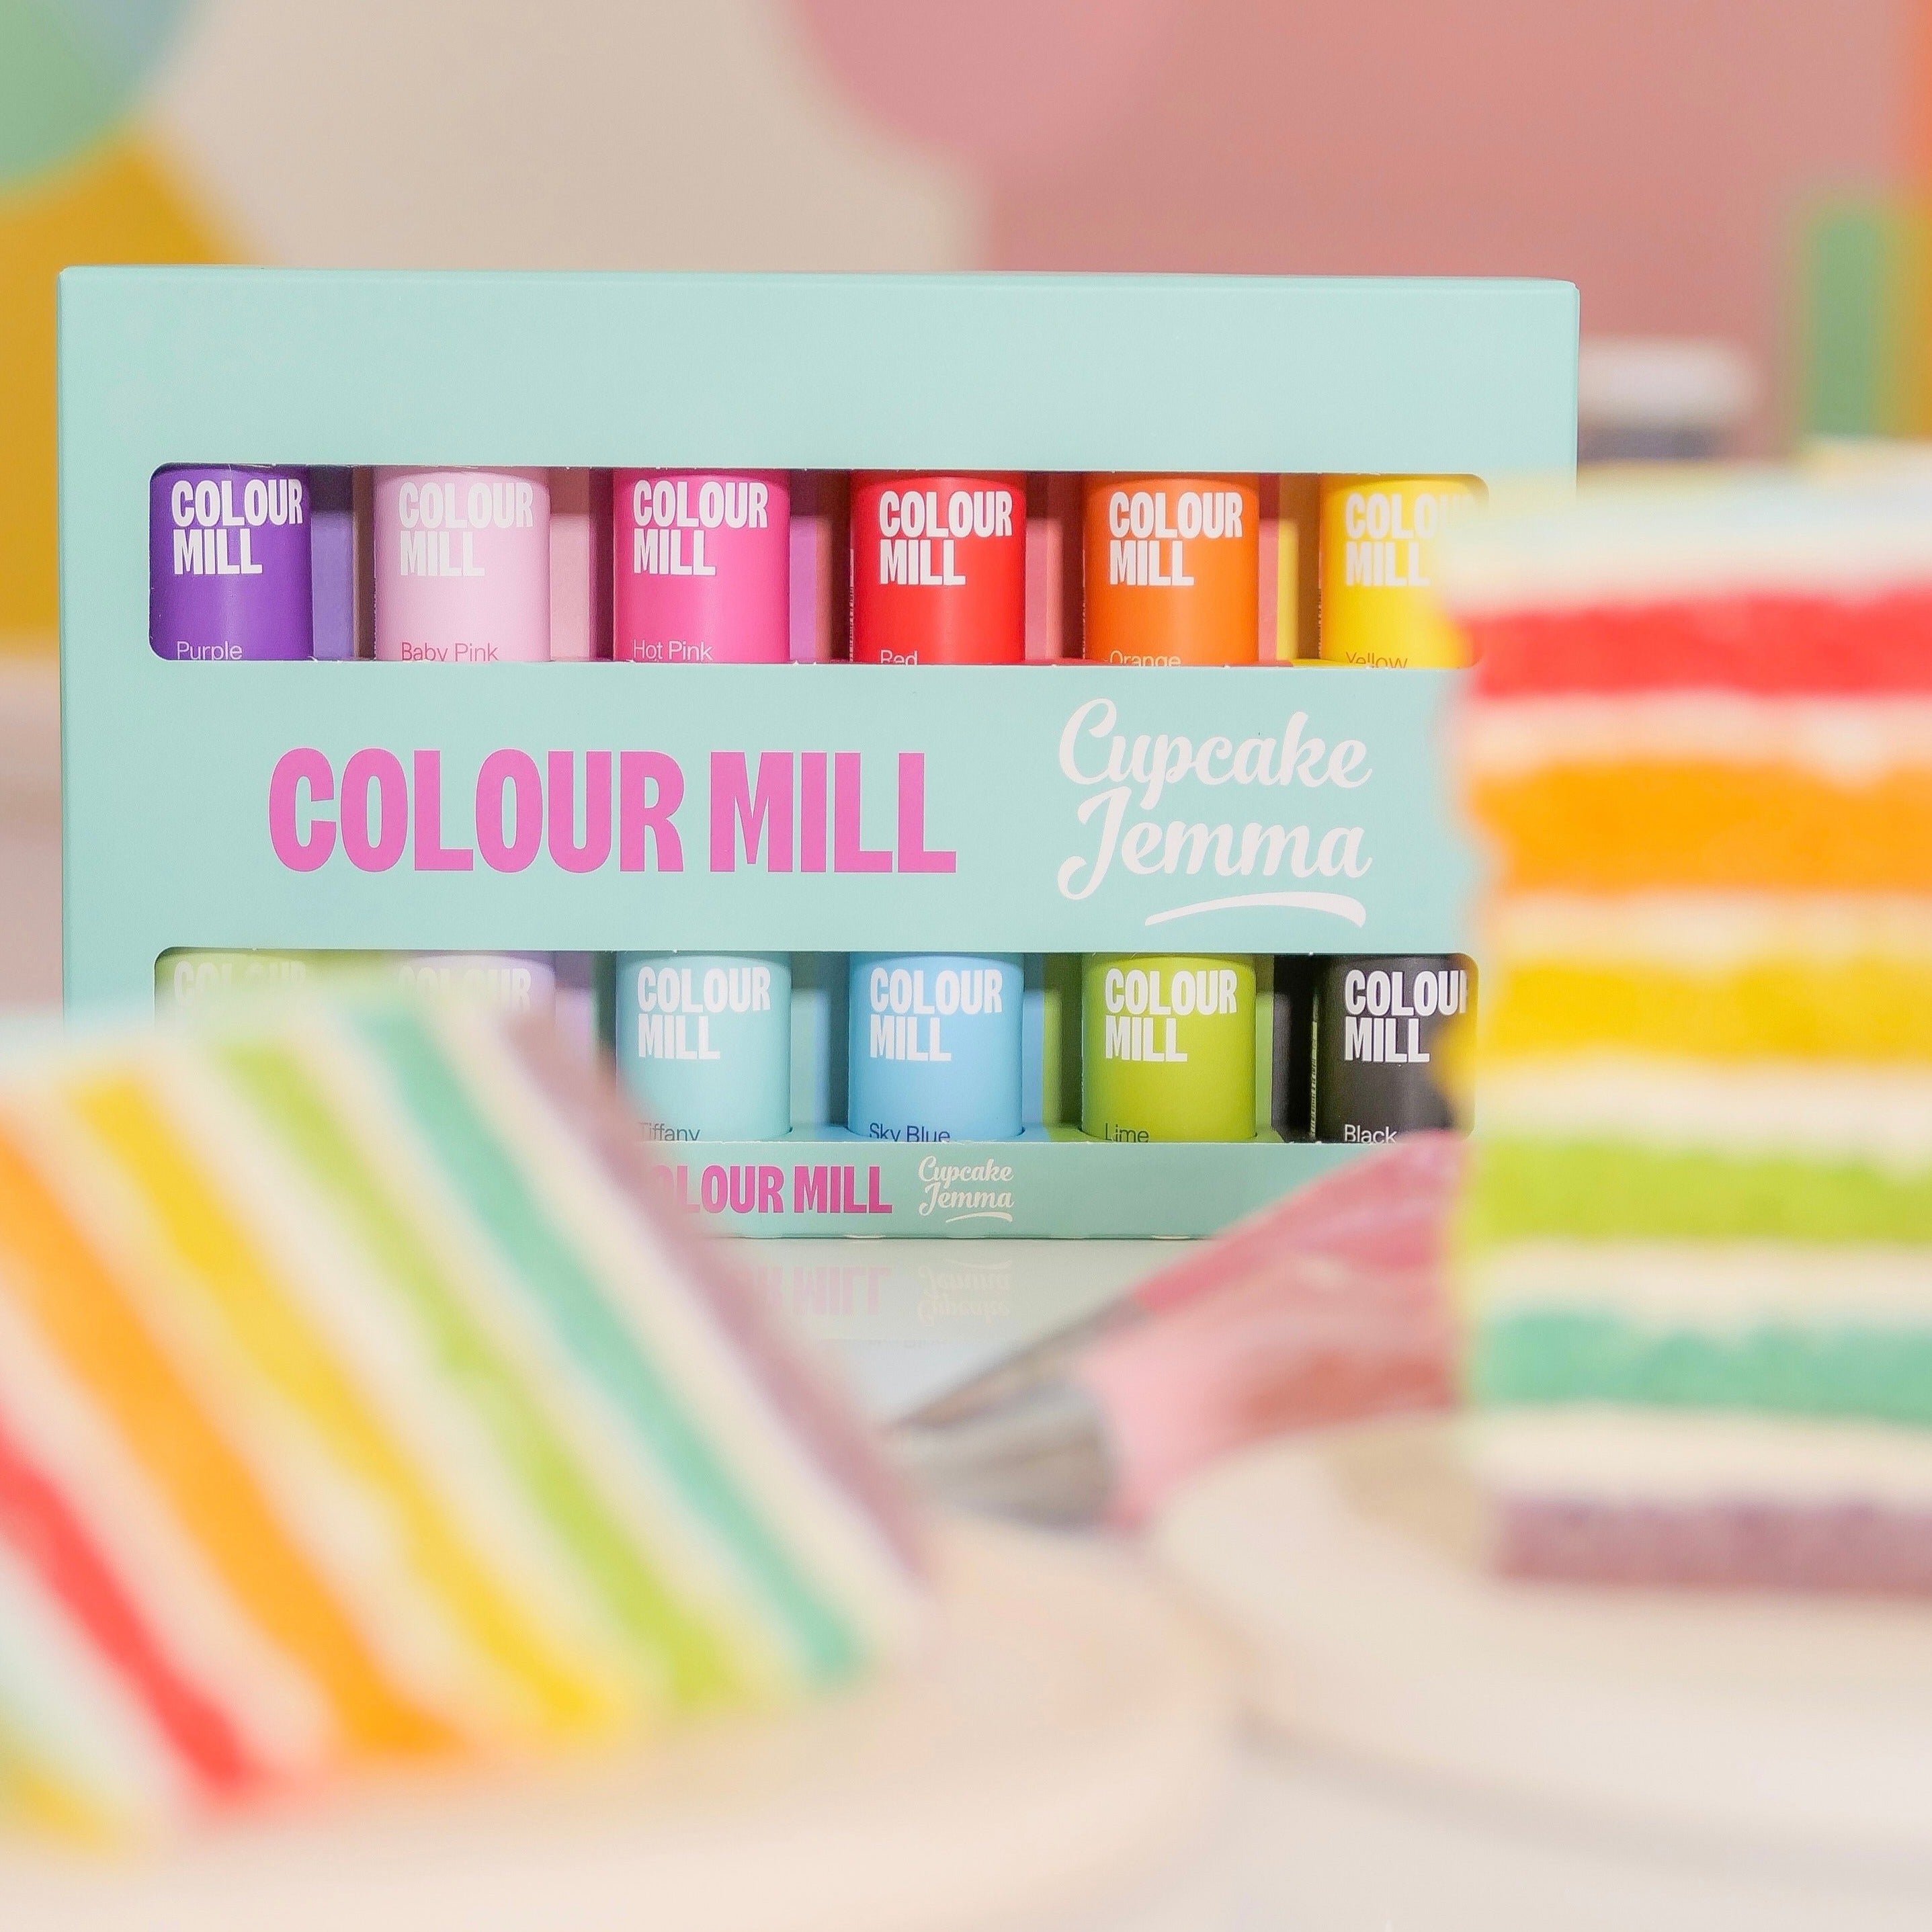 Buy Colour Mill Food Colouring Online In India -  India